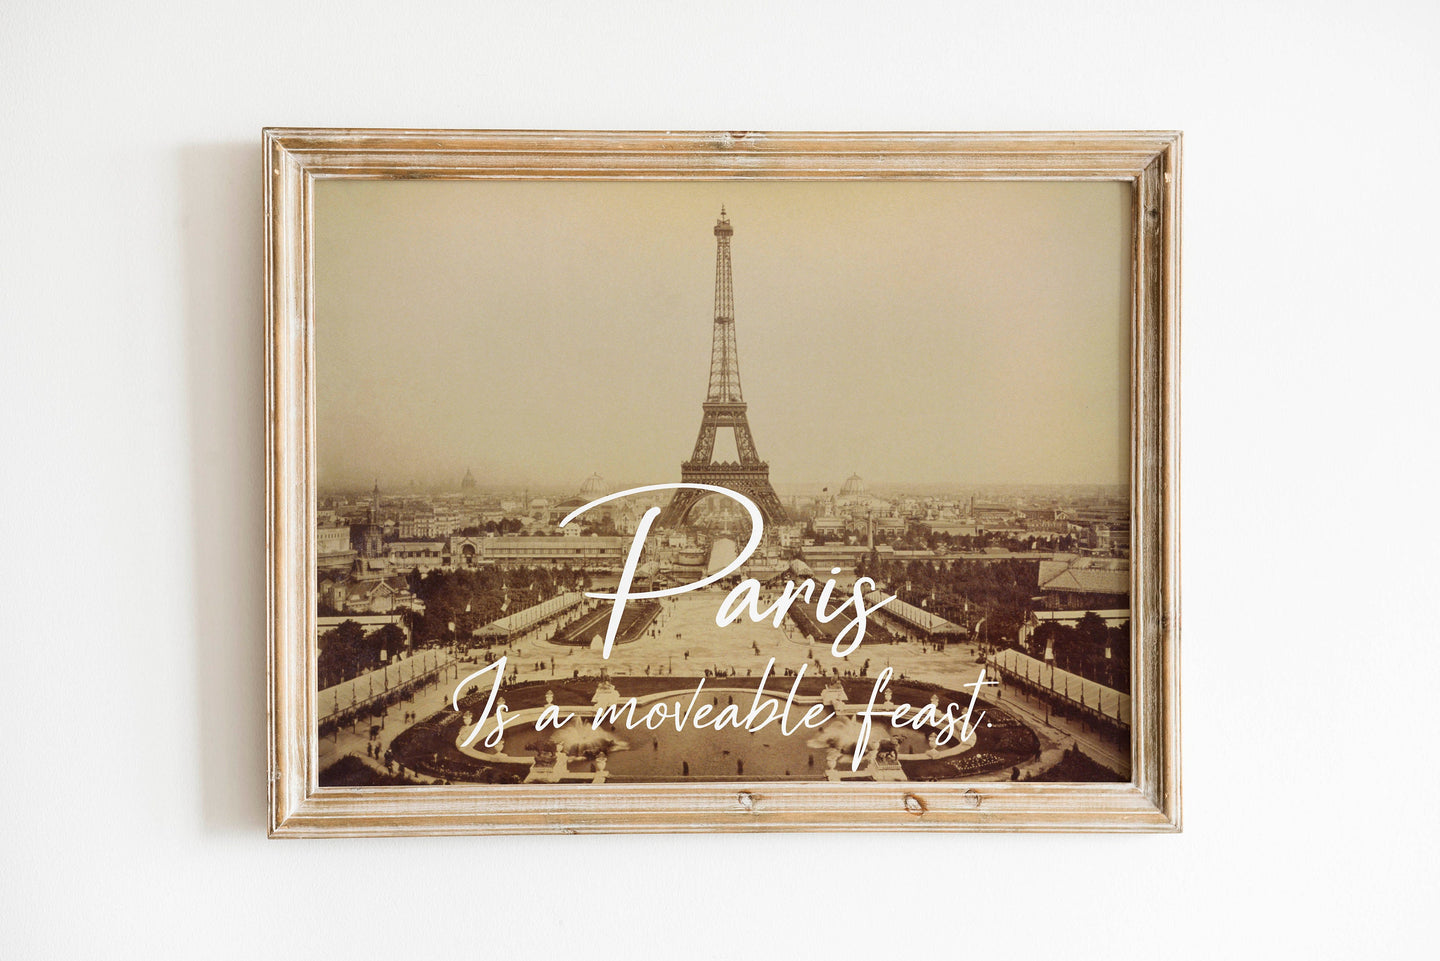 Ernest Hemingway Quote - Paris is a moveable feast - Eiffel Tower Paris Print for library or office wall Art Hemingway library decor